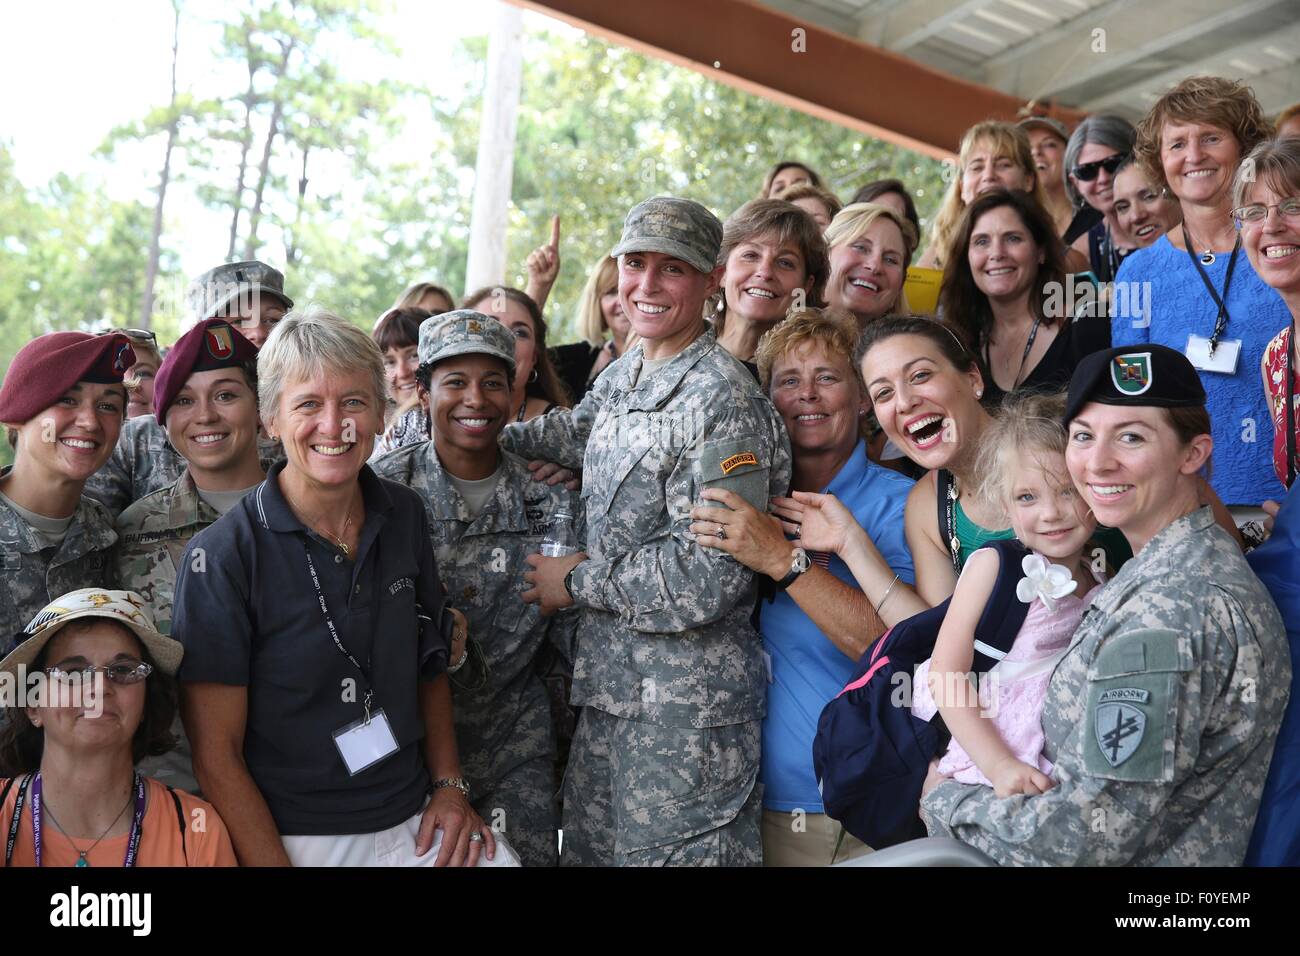 U.S. Army 1st Lt. Shaye Haver, center, poses for photos with female West Point alumni after becoming the first woman to graduate from Army Ranger school August 21, 2015 at Fort Benning, Georgia. Stock Photo